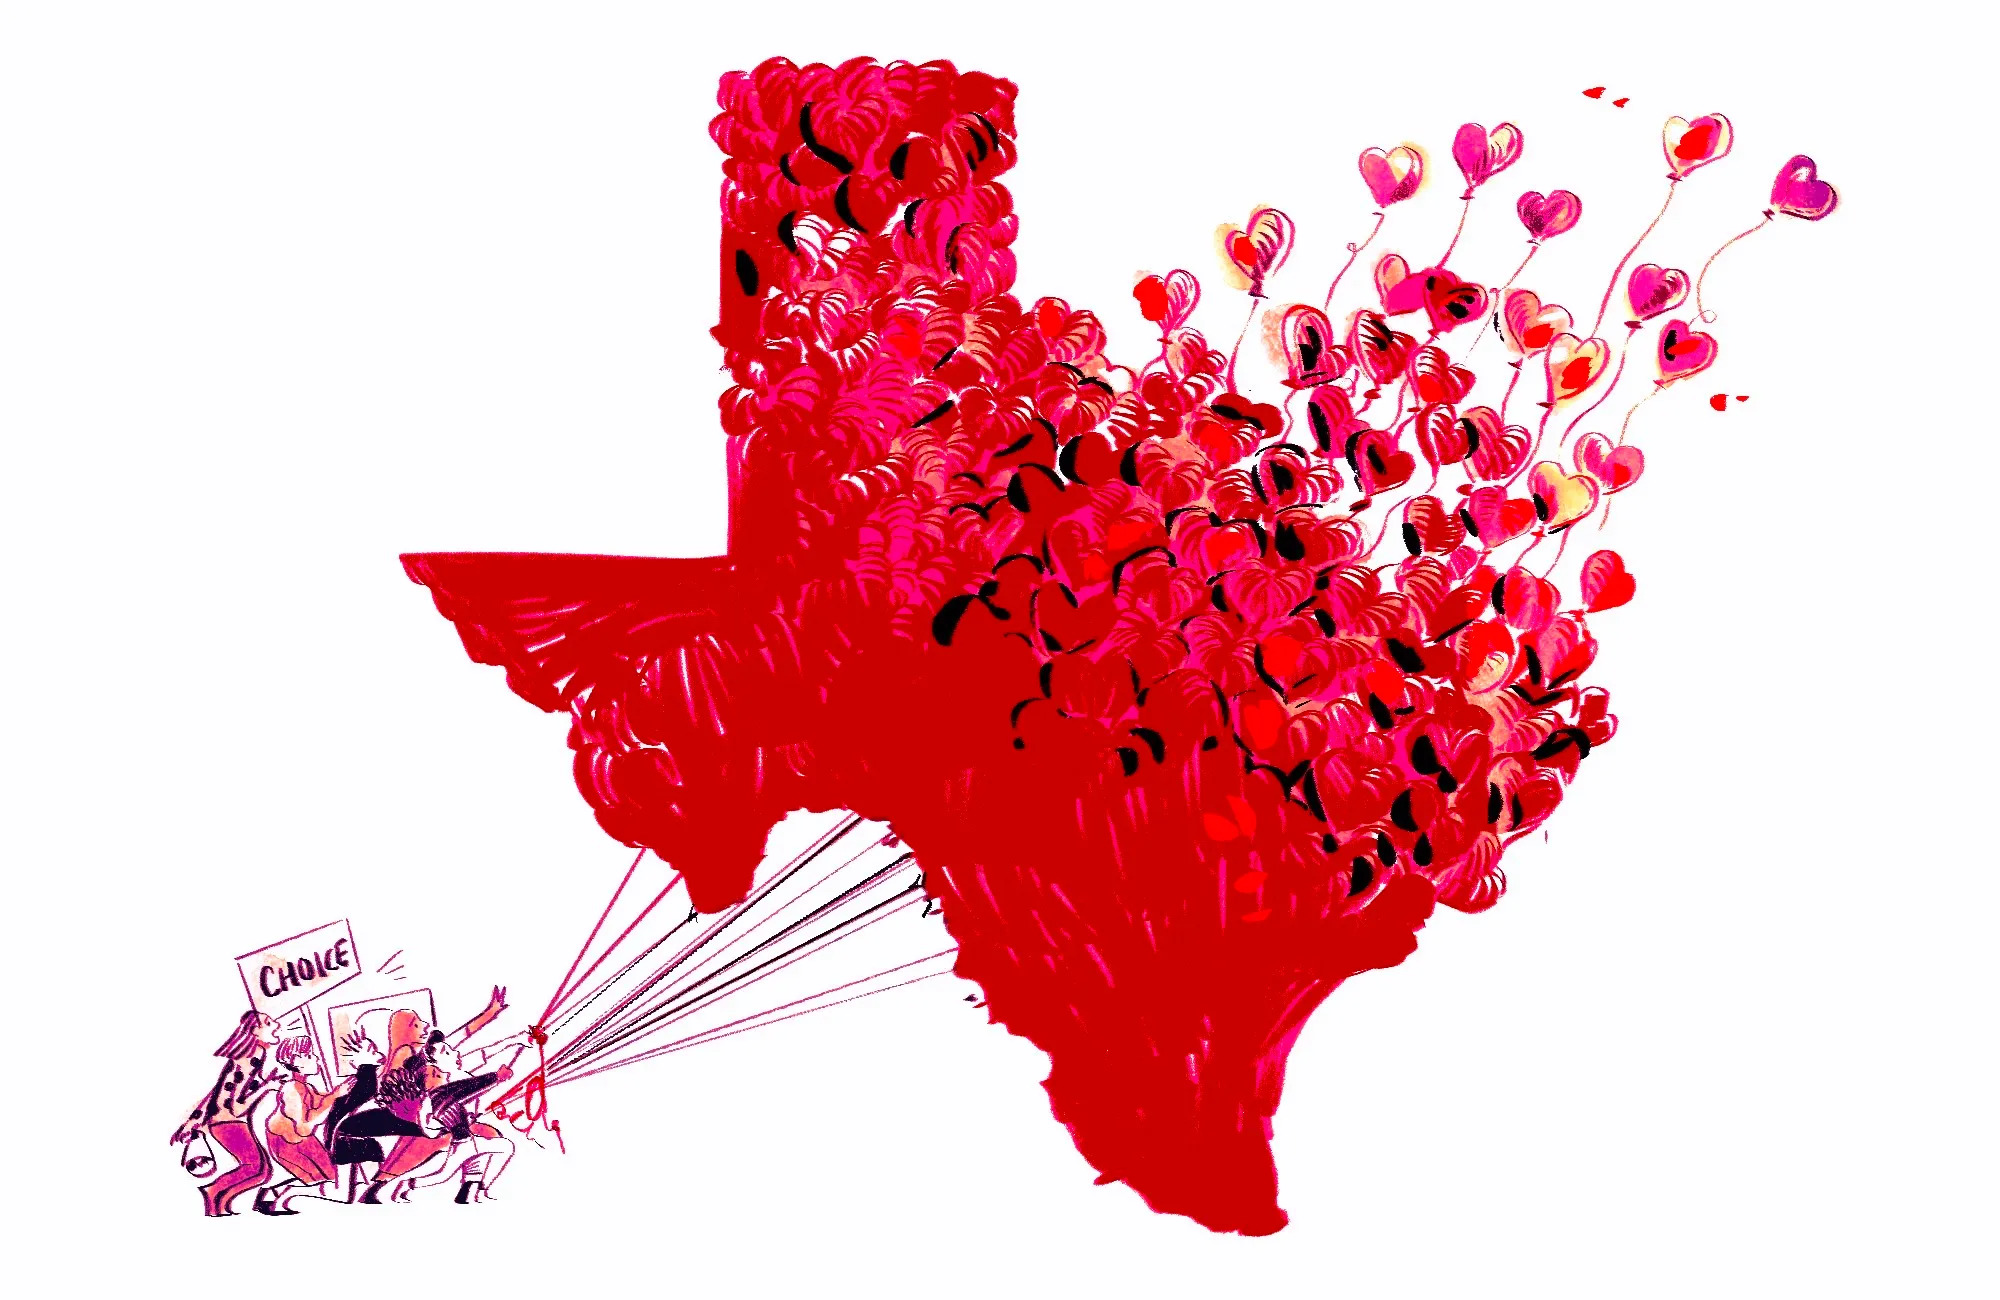 An illustration of the state of texas being held together as a group of heart-shaped balloons. A group of women hold the balloon strings and carry a sign reading 